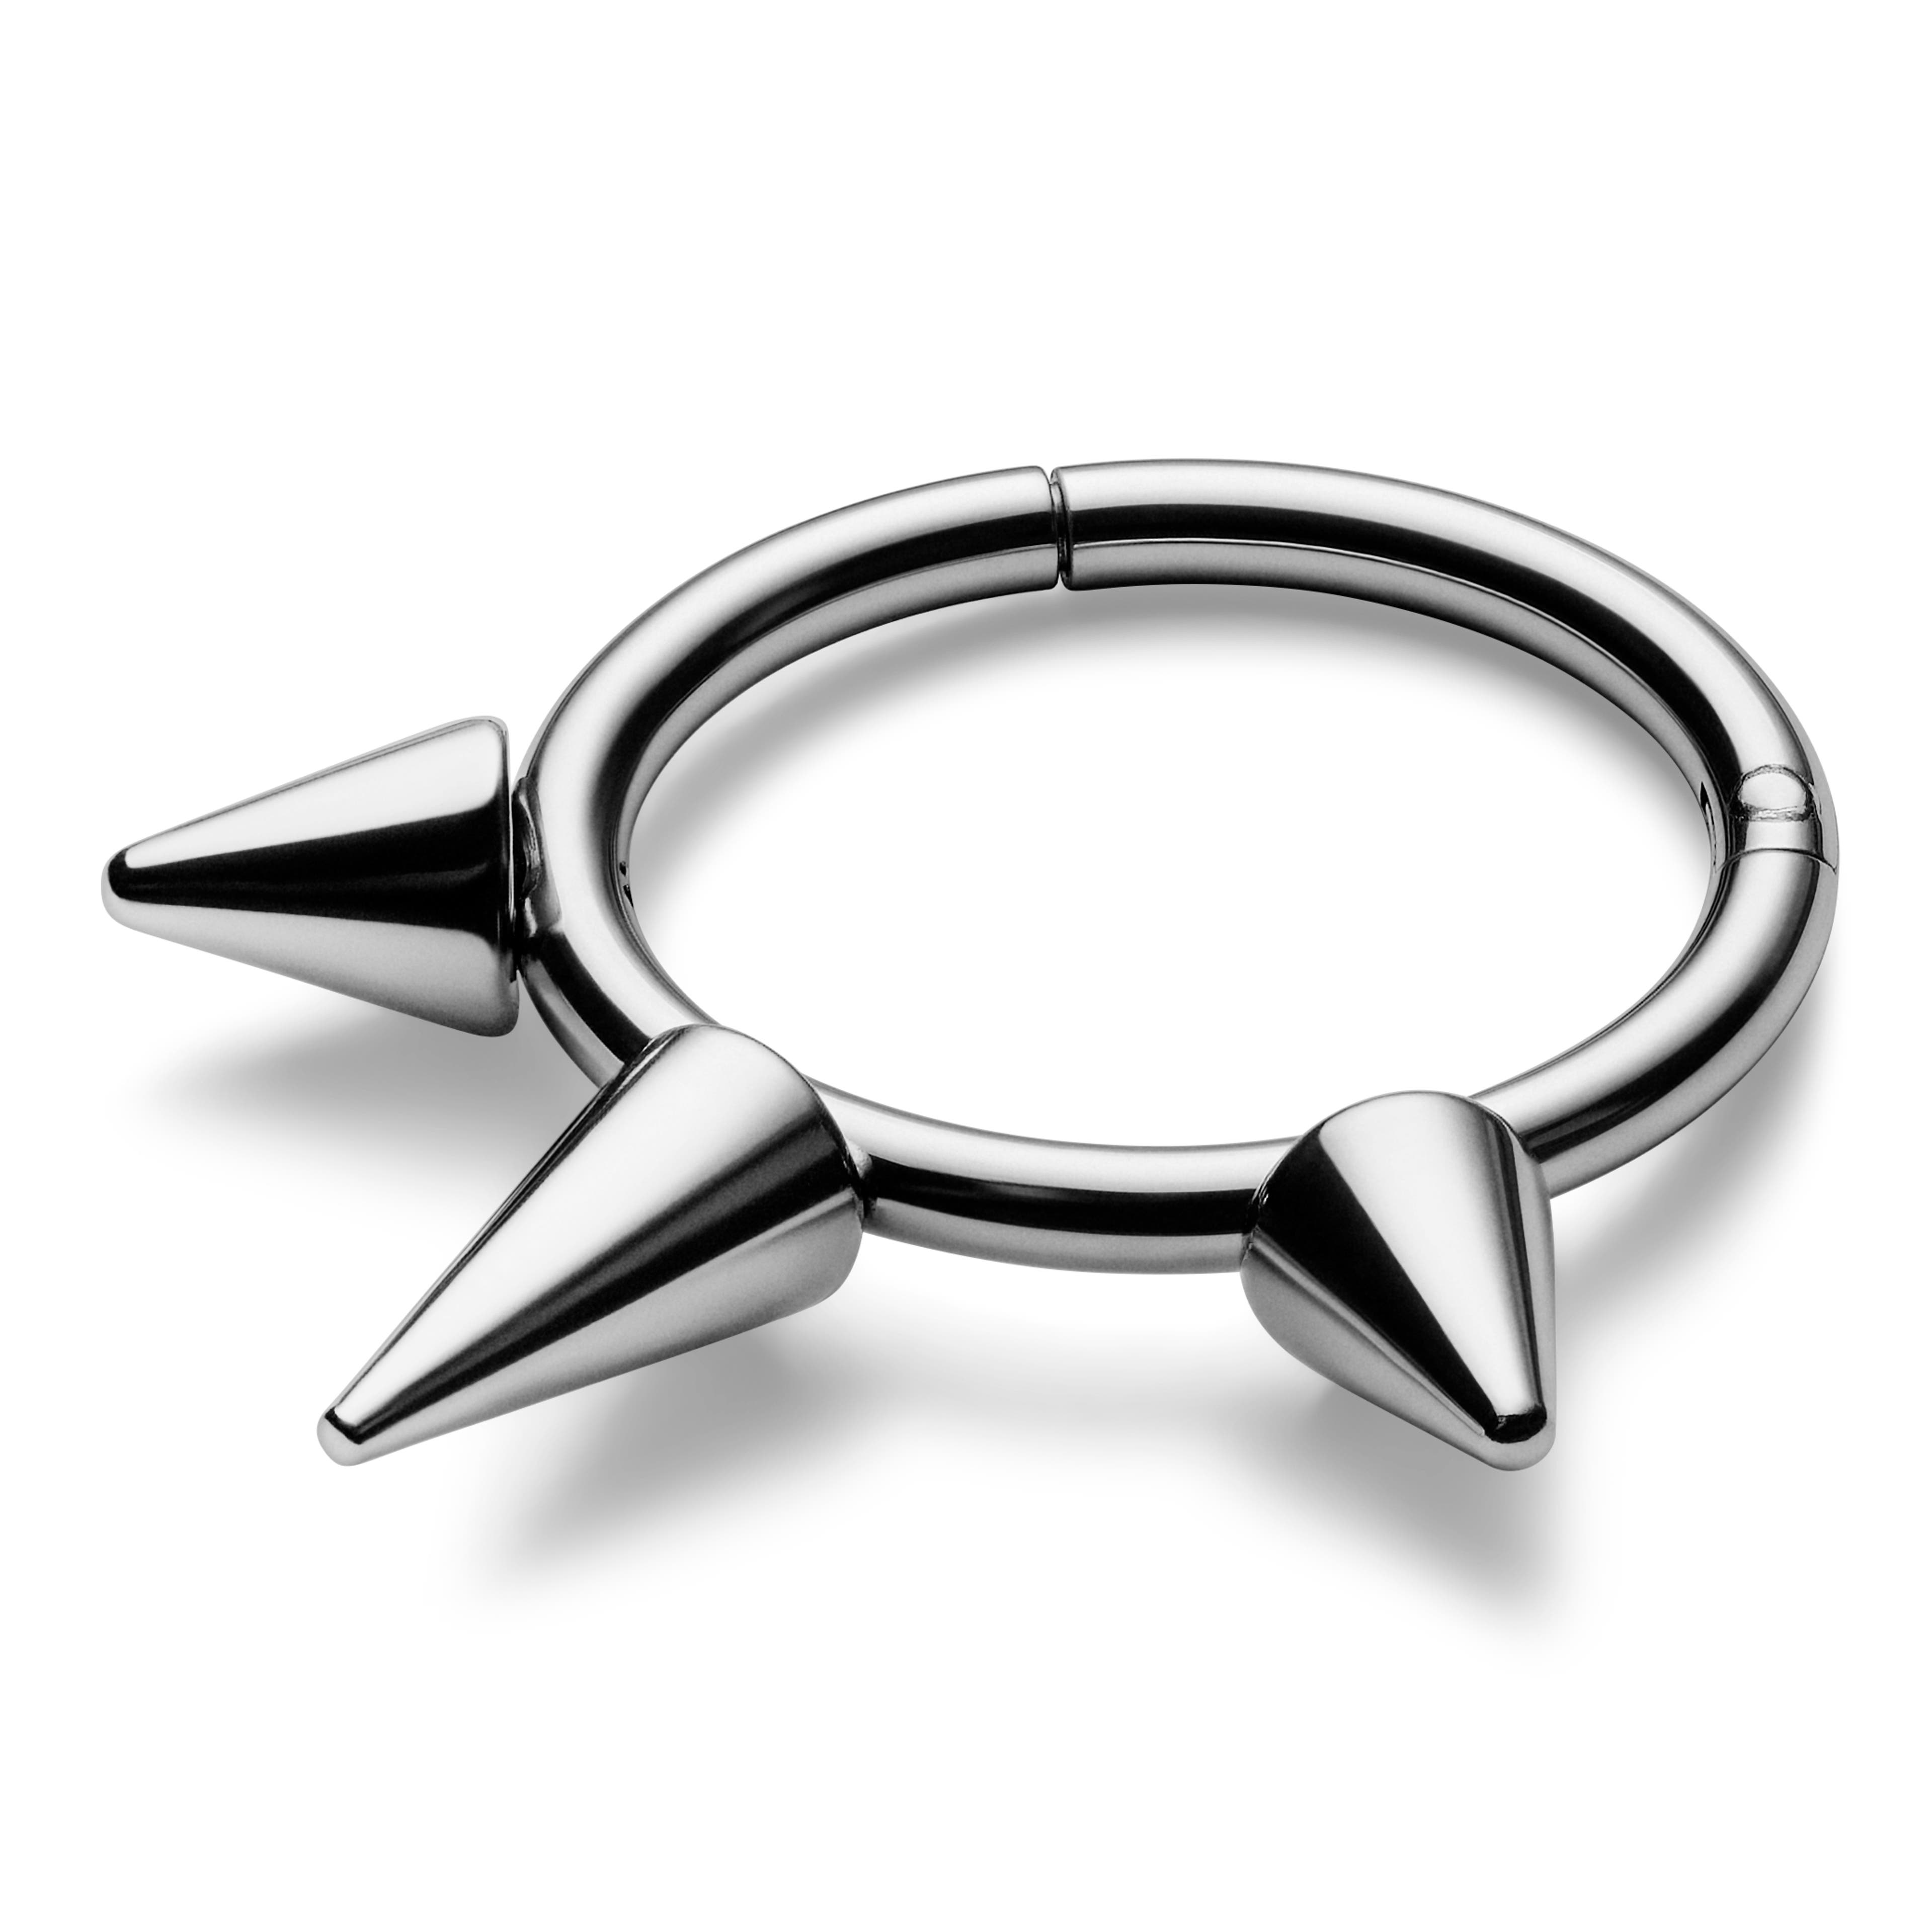 8 mm Silver-Tone Spiked Surgical Steel Piercing Ring